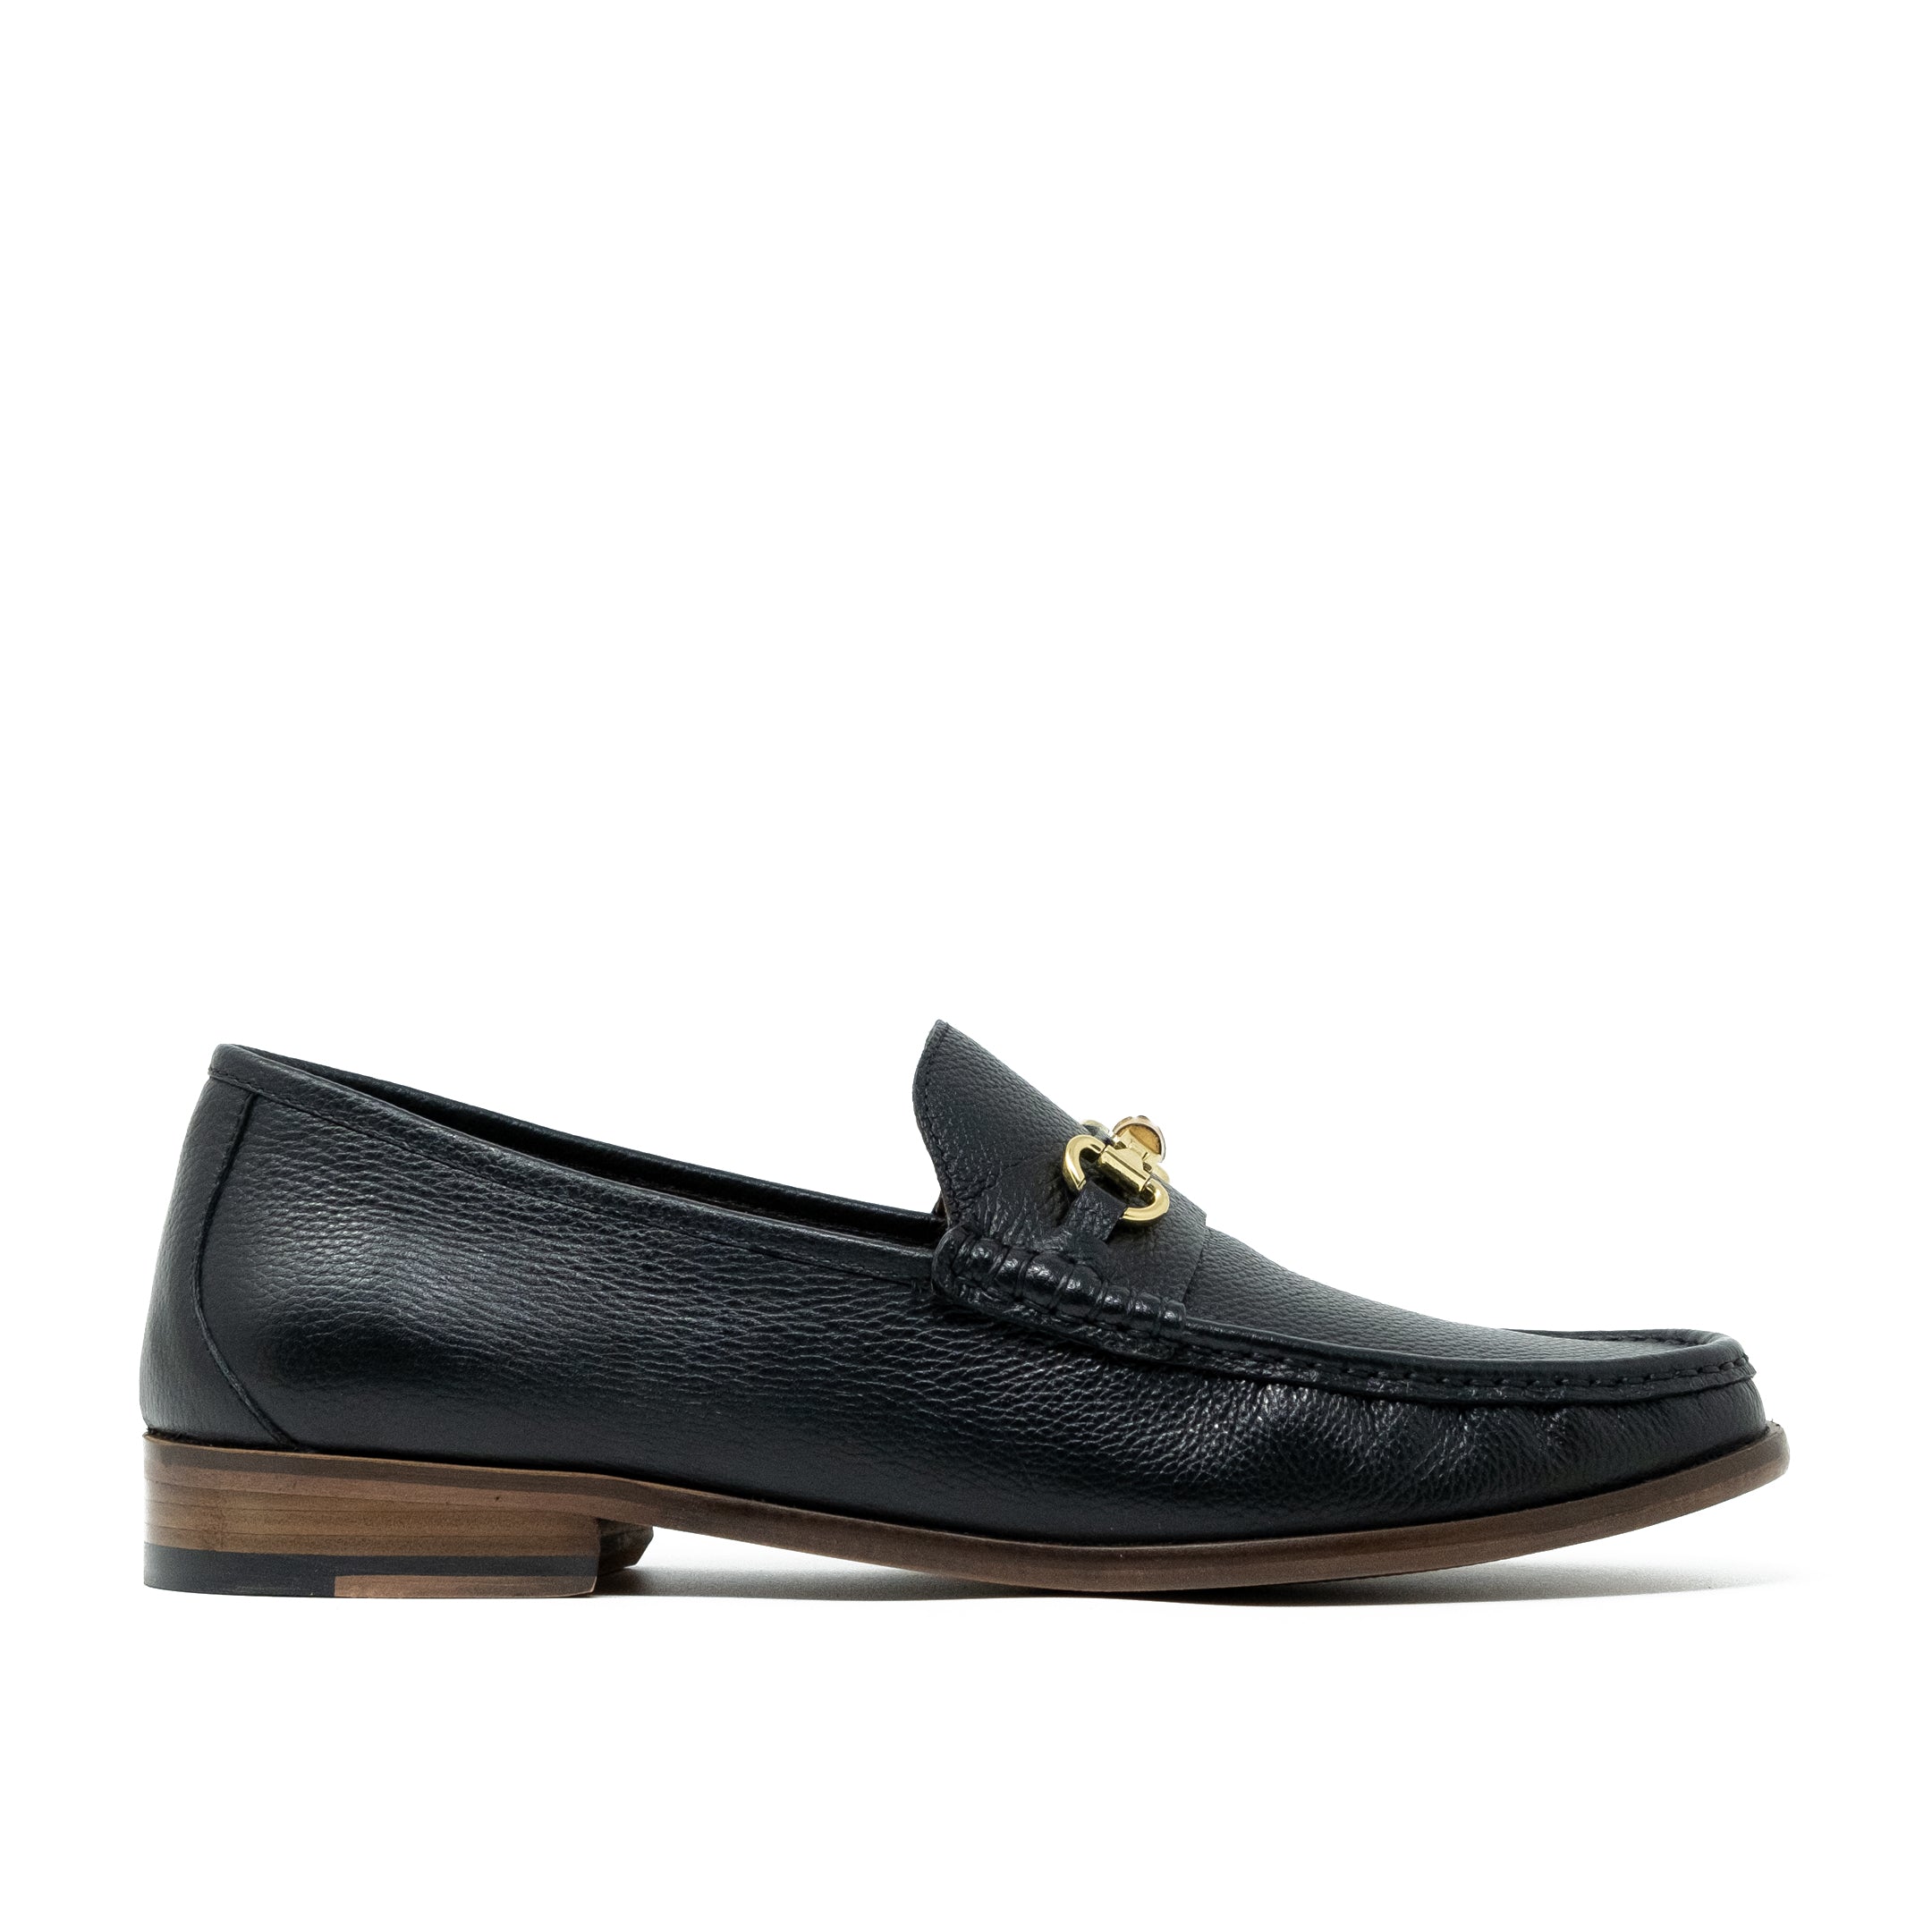 Walk London Tino Bone Loafer in Black Grained Leather